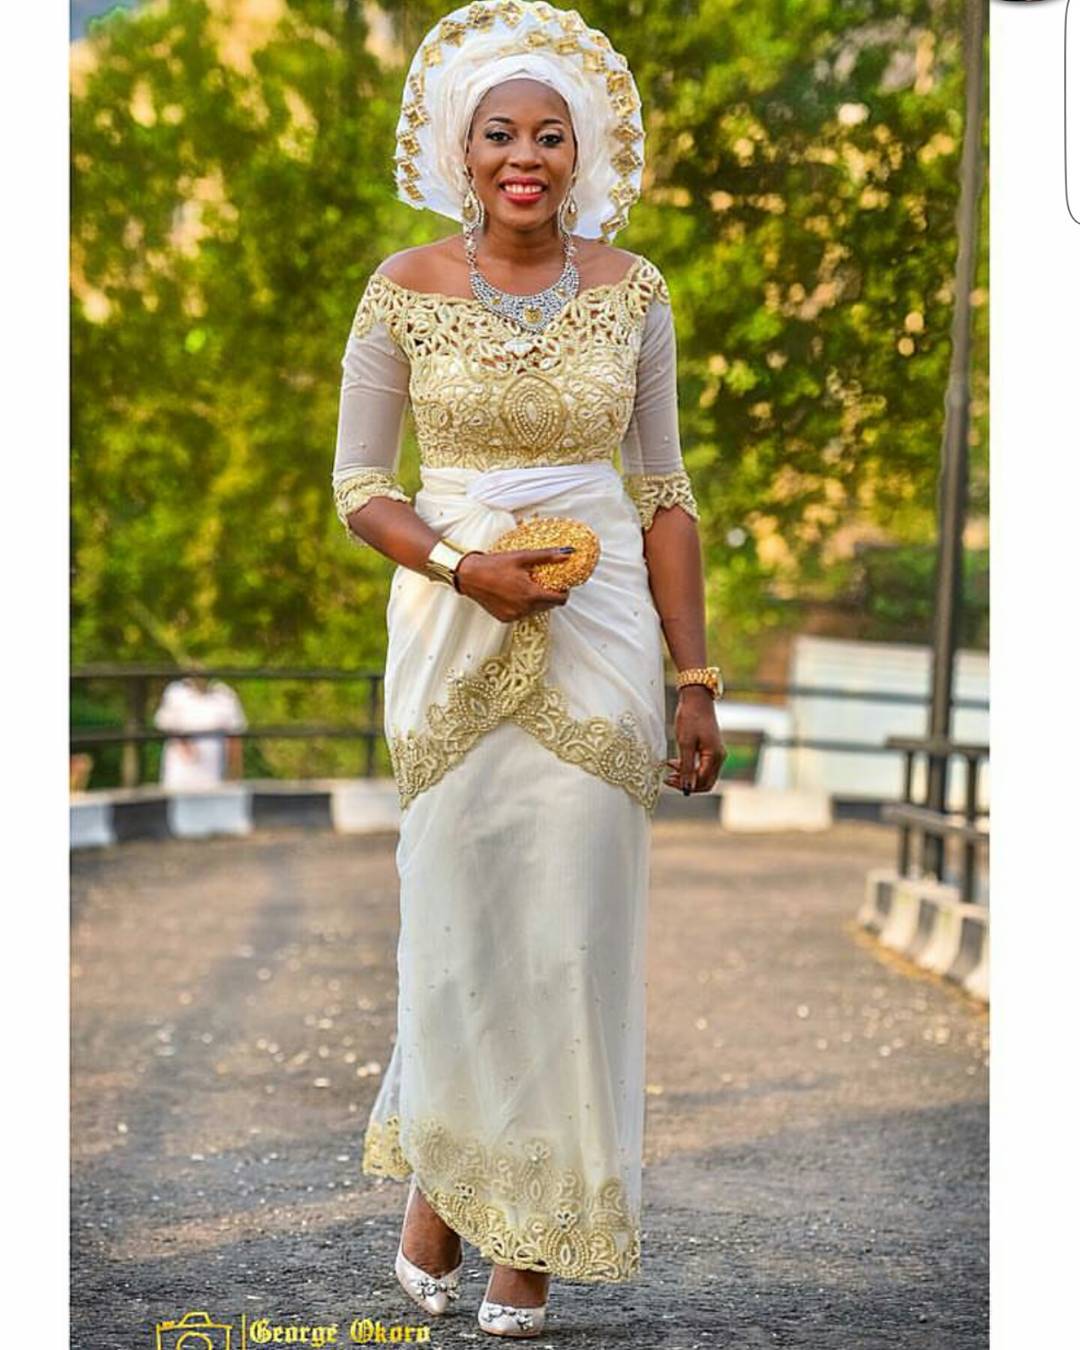 We Just Have To Acknowledge These Beautiful Ibo Brides Outfits